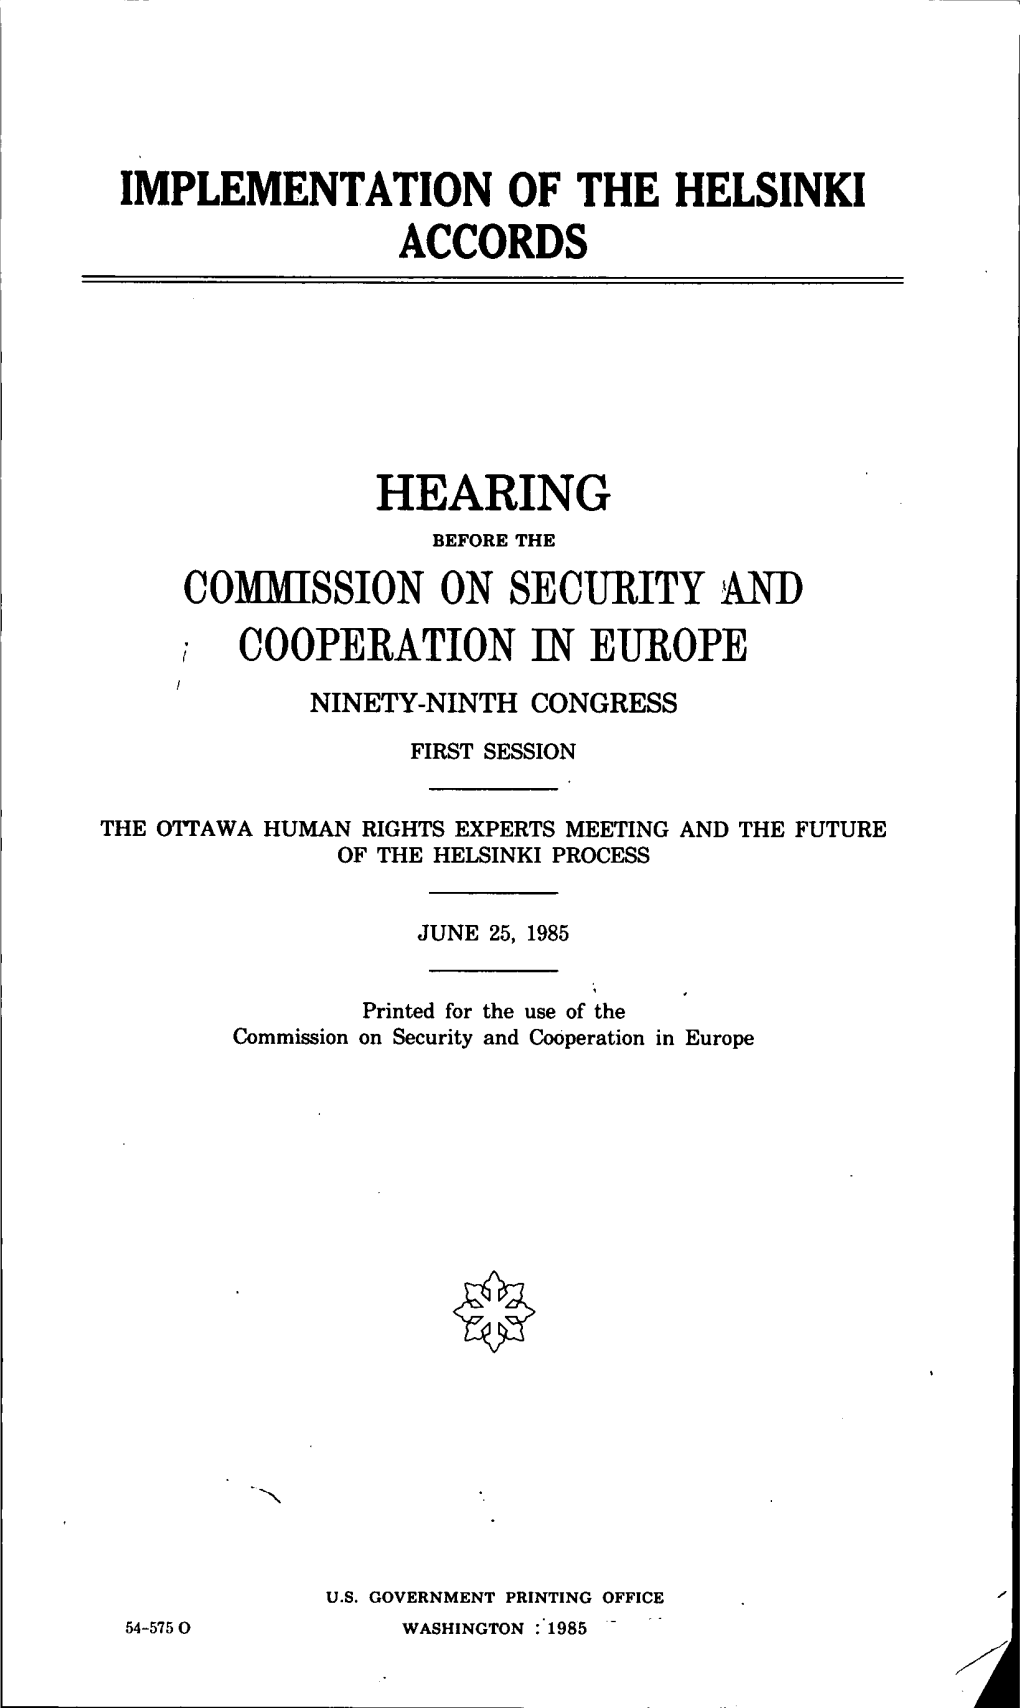 IMPLEMENTATION of the HELSINKI ACCORDS HEARING COMMISSION on SECURITY and I COOPERATION in EUROPE